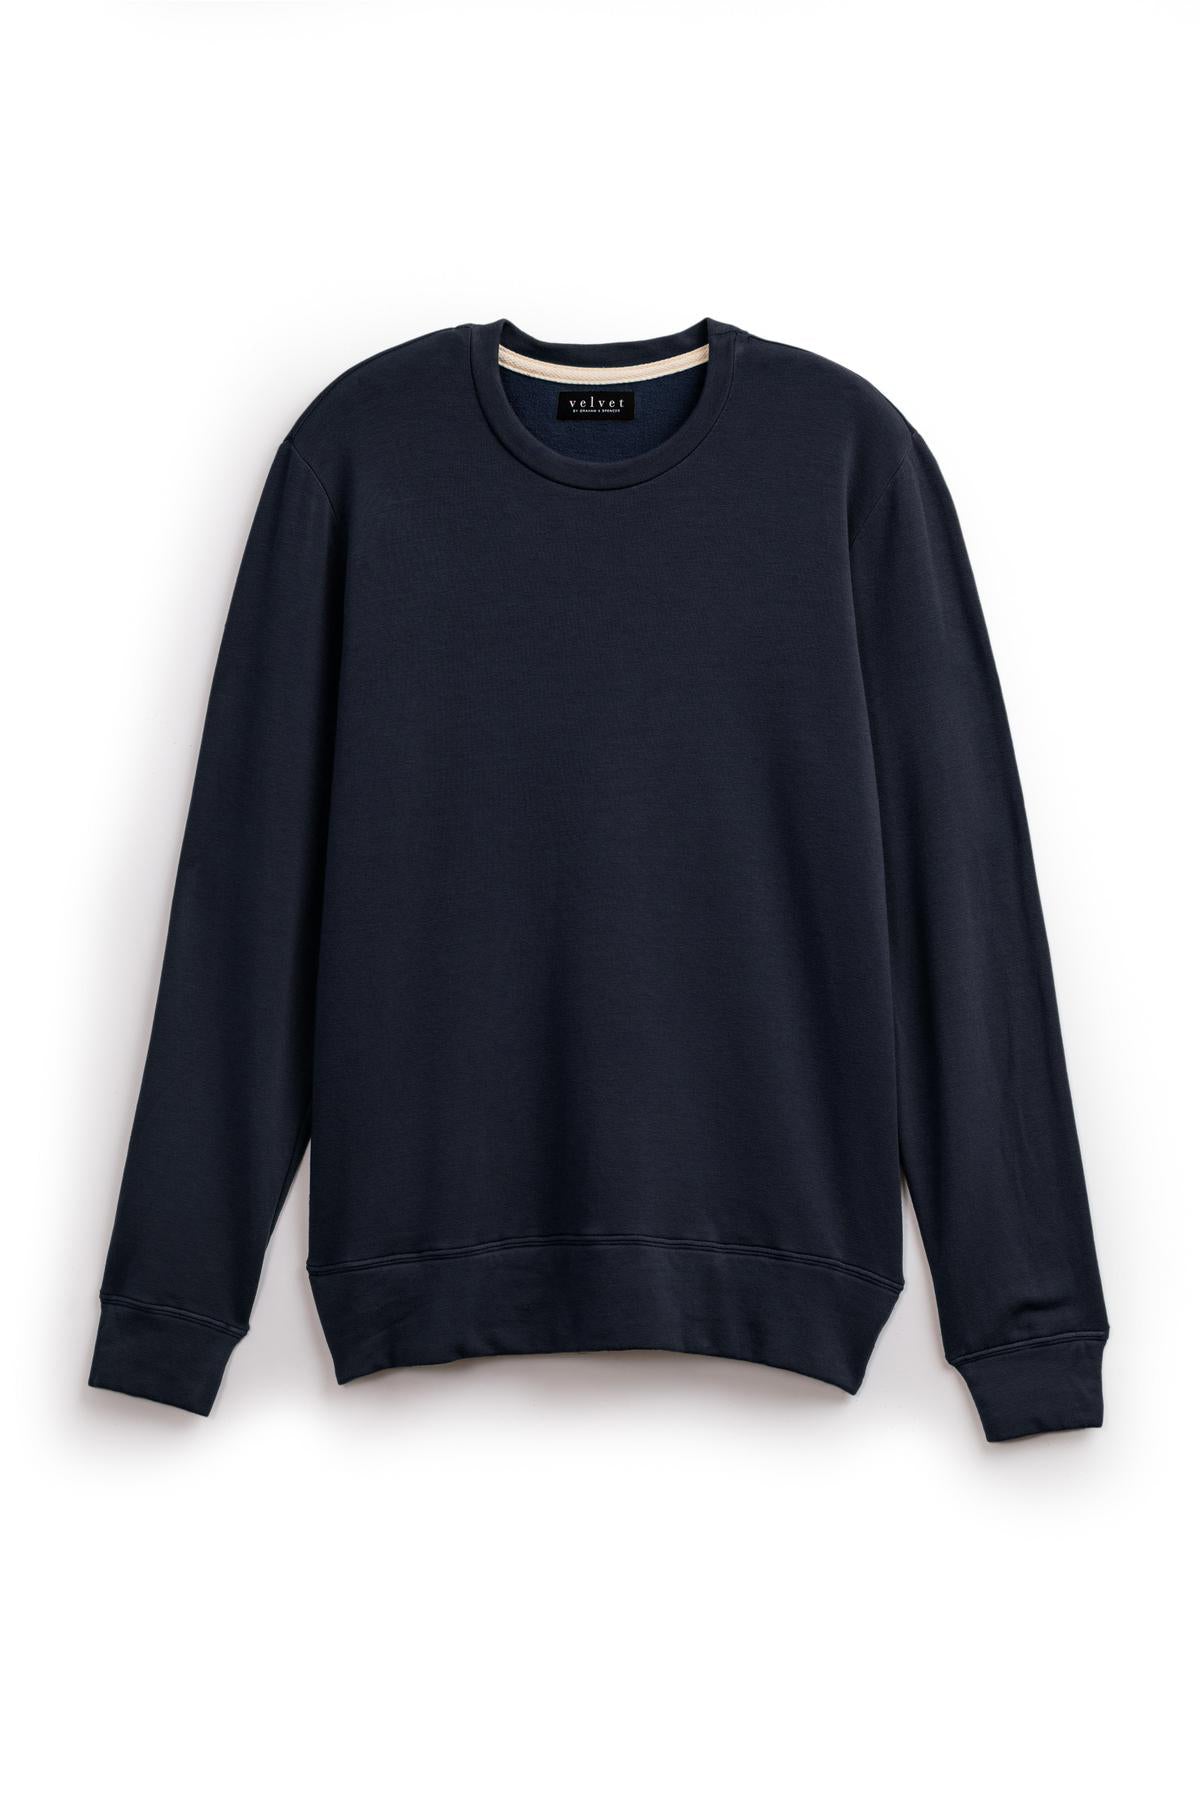   A SOREN LUXE FLEECE PULLOVER by Velvet by Graham & Spencer with a soft interior hanging on a white background. 